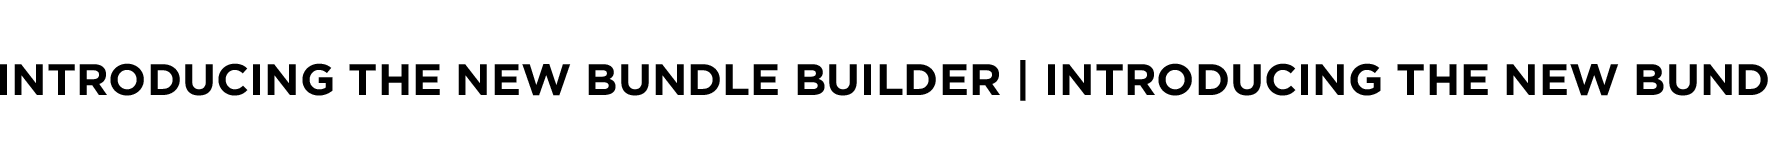 Introducing the new Bundle Builder